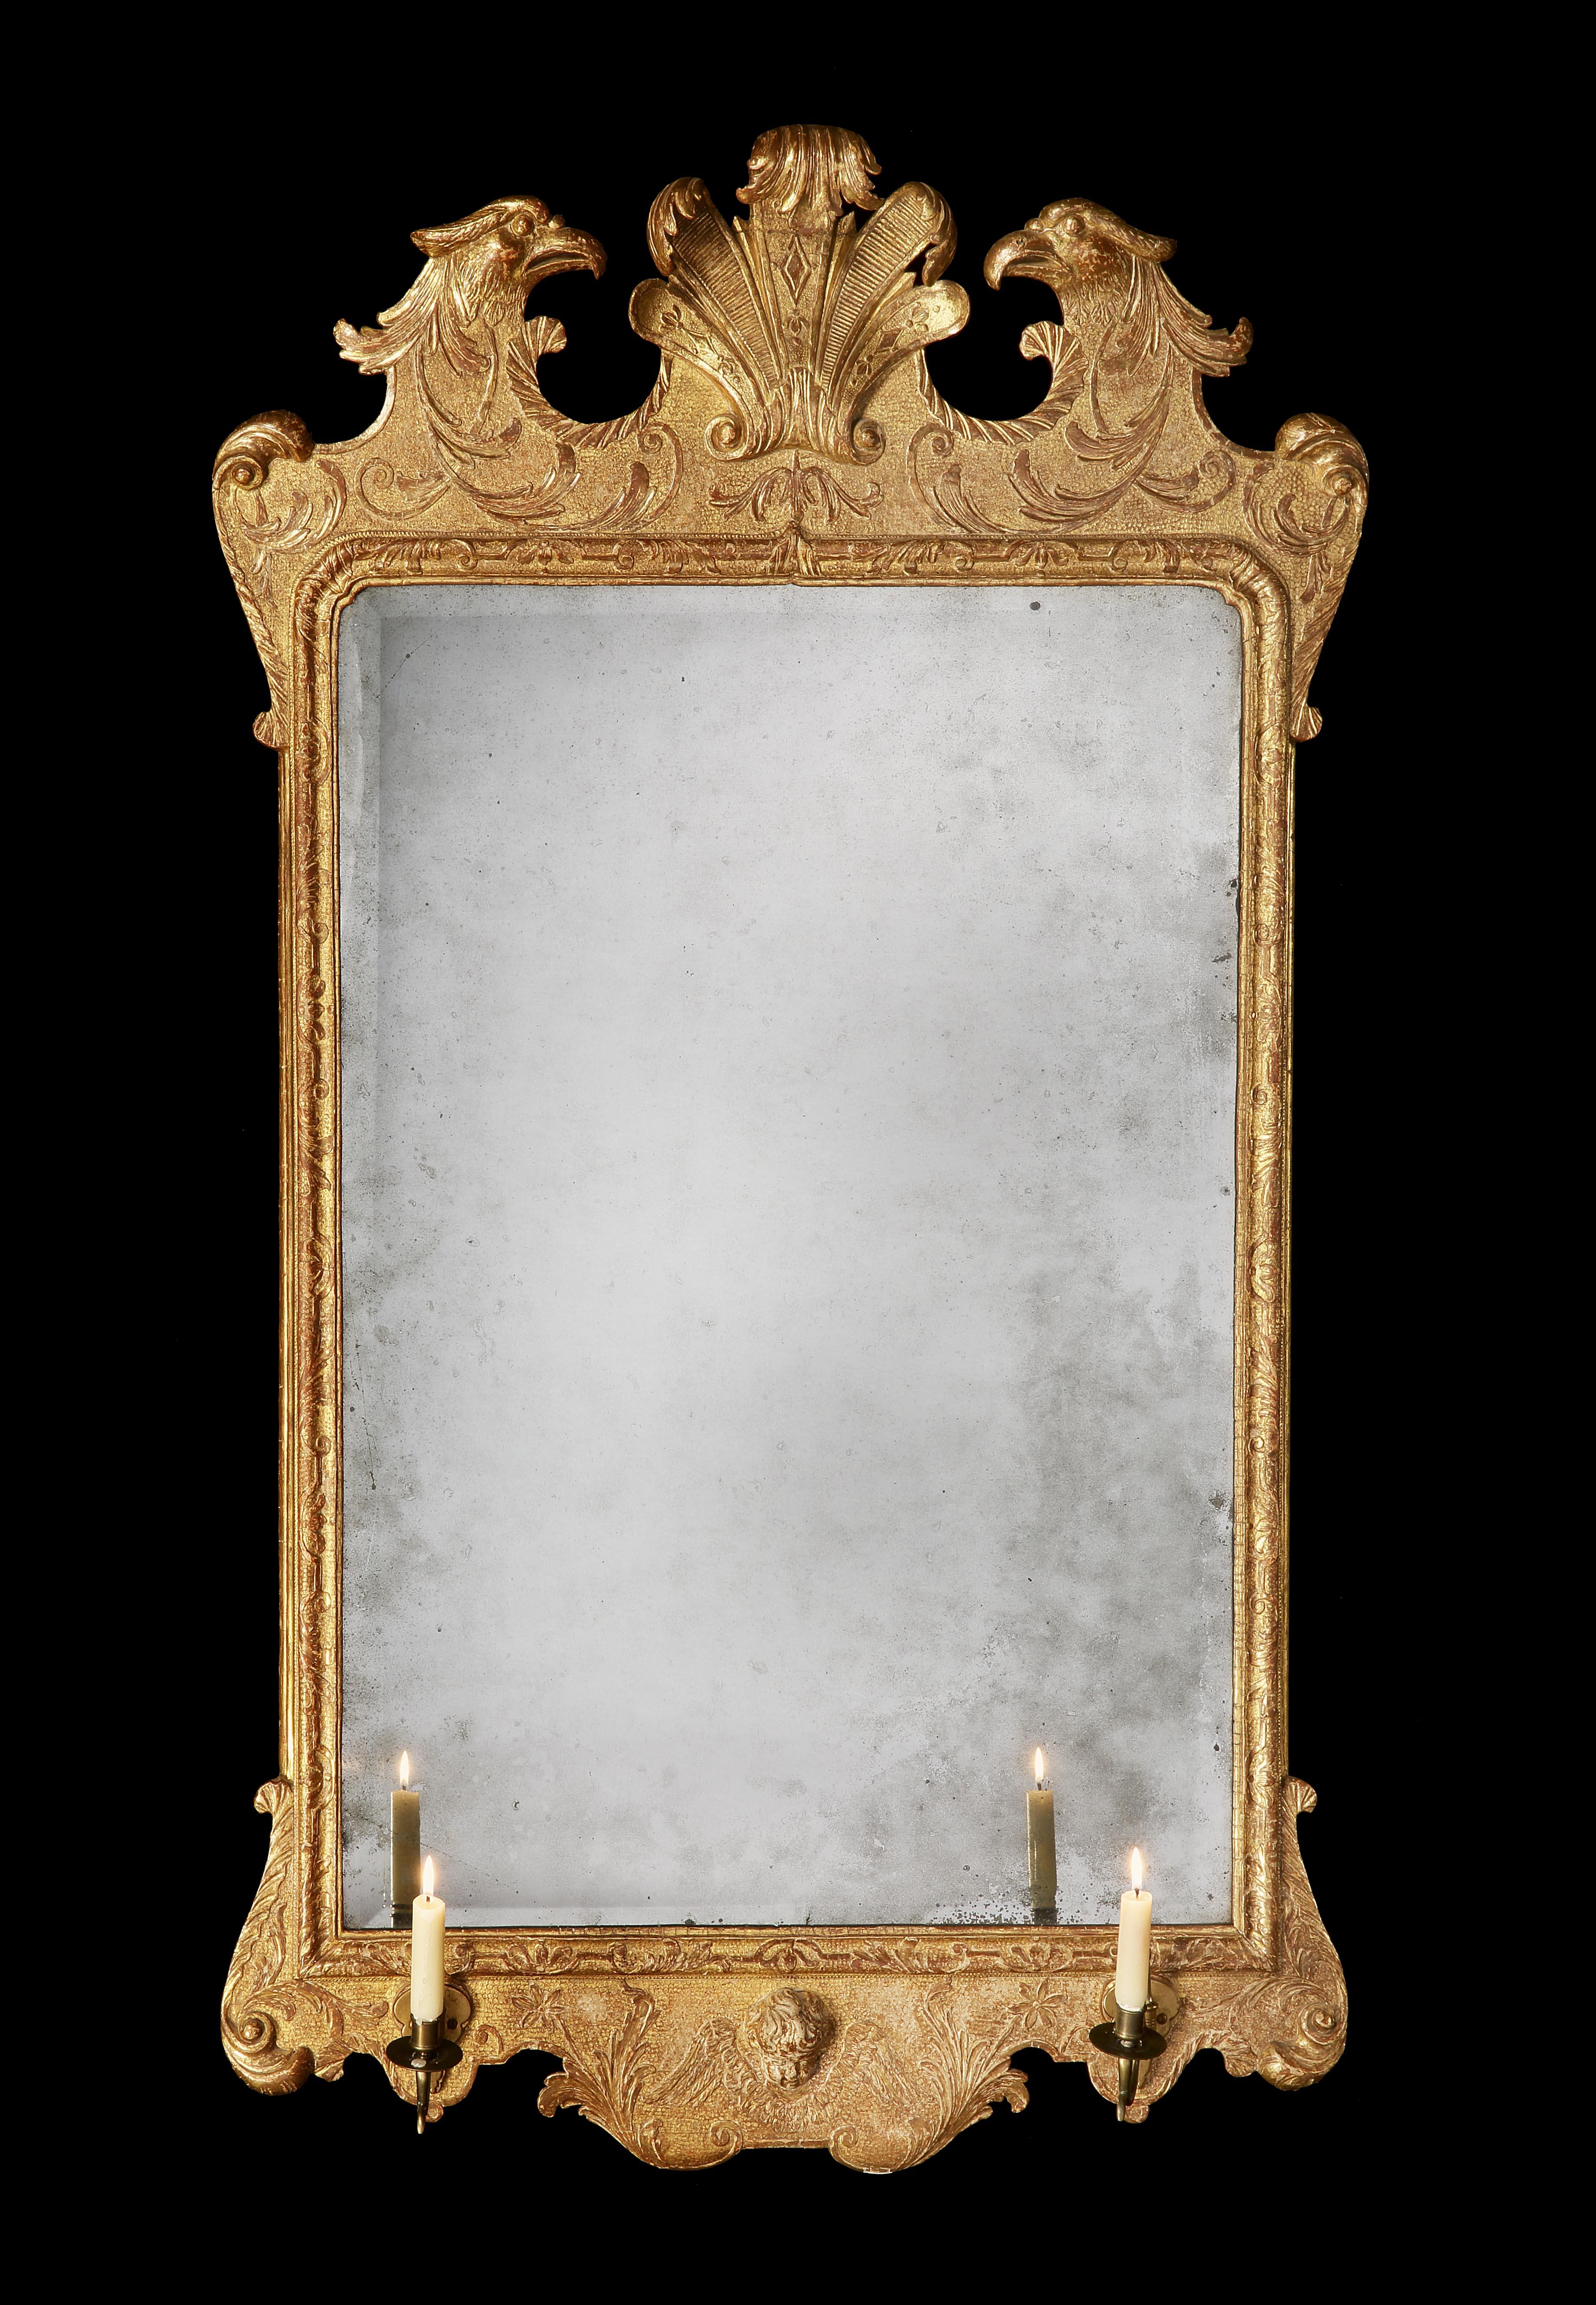 A very fine George II gilt gesso mirror. The rounded rectangular bevelled plate within a foliate-carved moulded frame, the cresting centred by feathers and flanked by eagles' heads on a pounced ground, the apron centred by a cherub mask and wings.